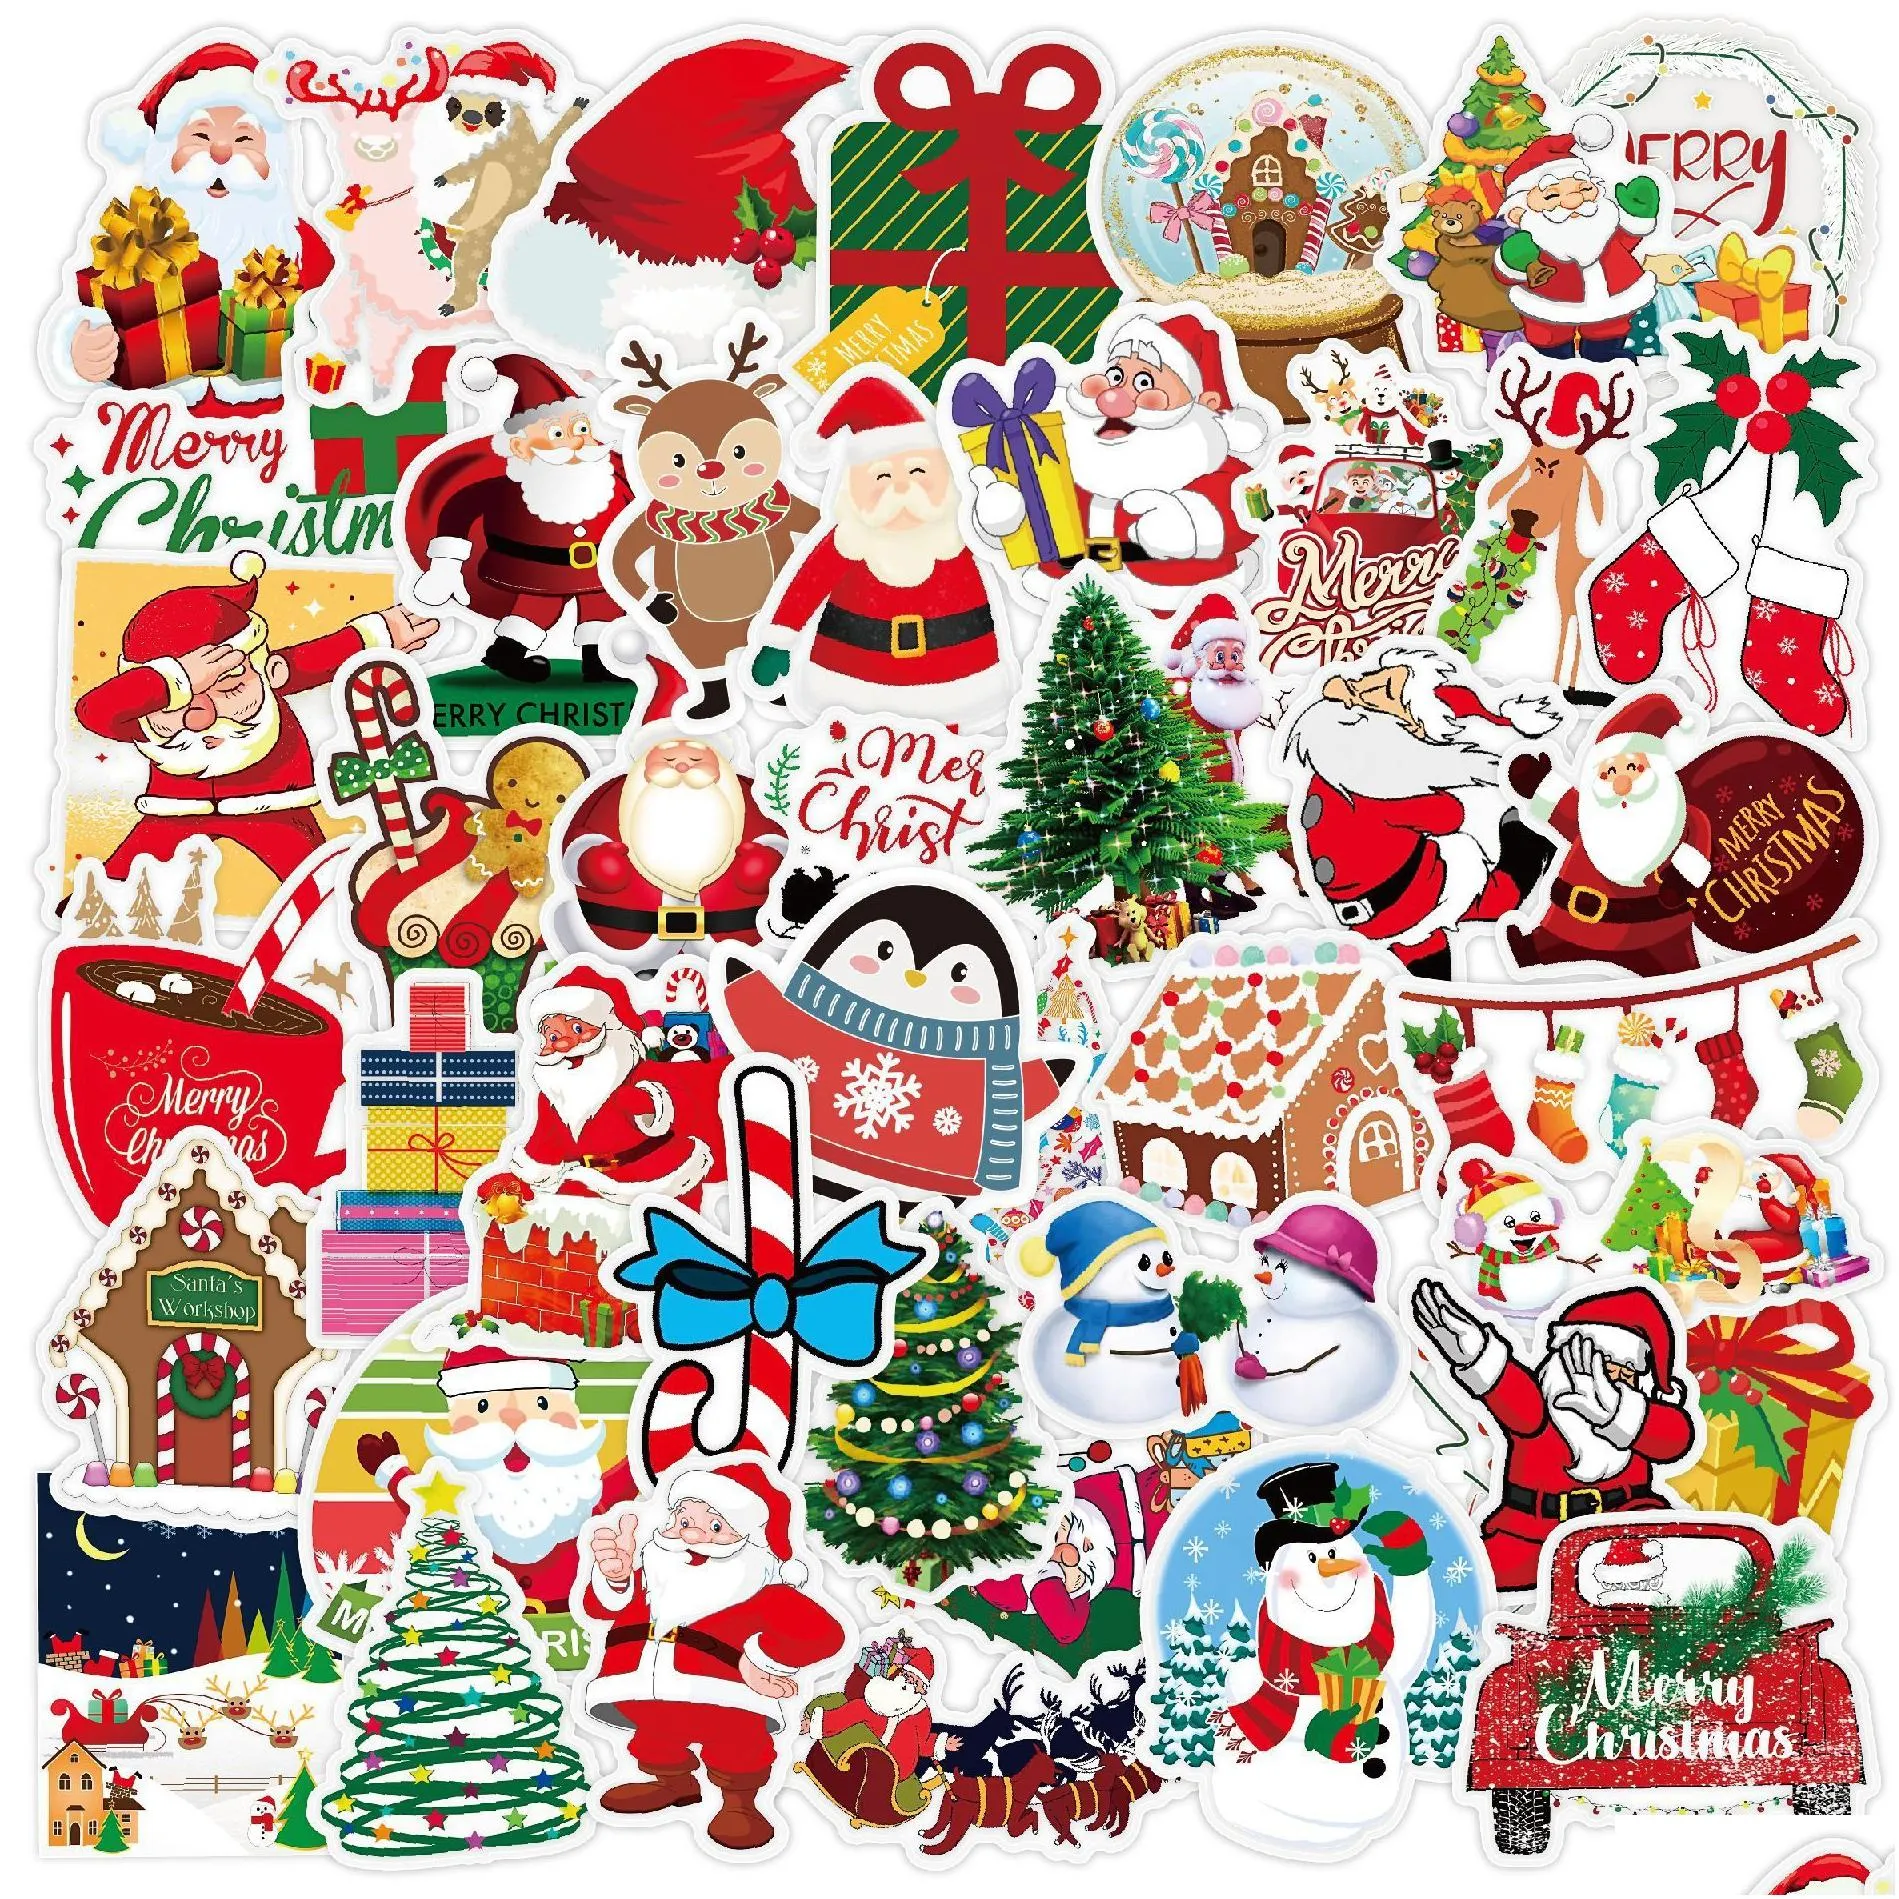 Car Stickers 50Pcs/Lot Christmas Holiday Diy Stickers Posters Iti Skateboard Snowboard Laptop Lage Motorcycle Bike Home Decal Gifts Fo Dhzmz